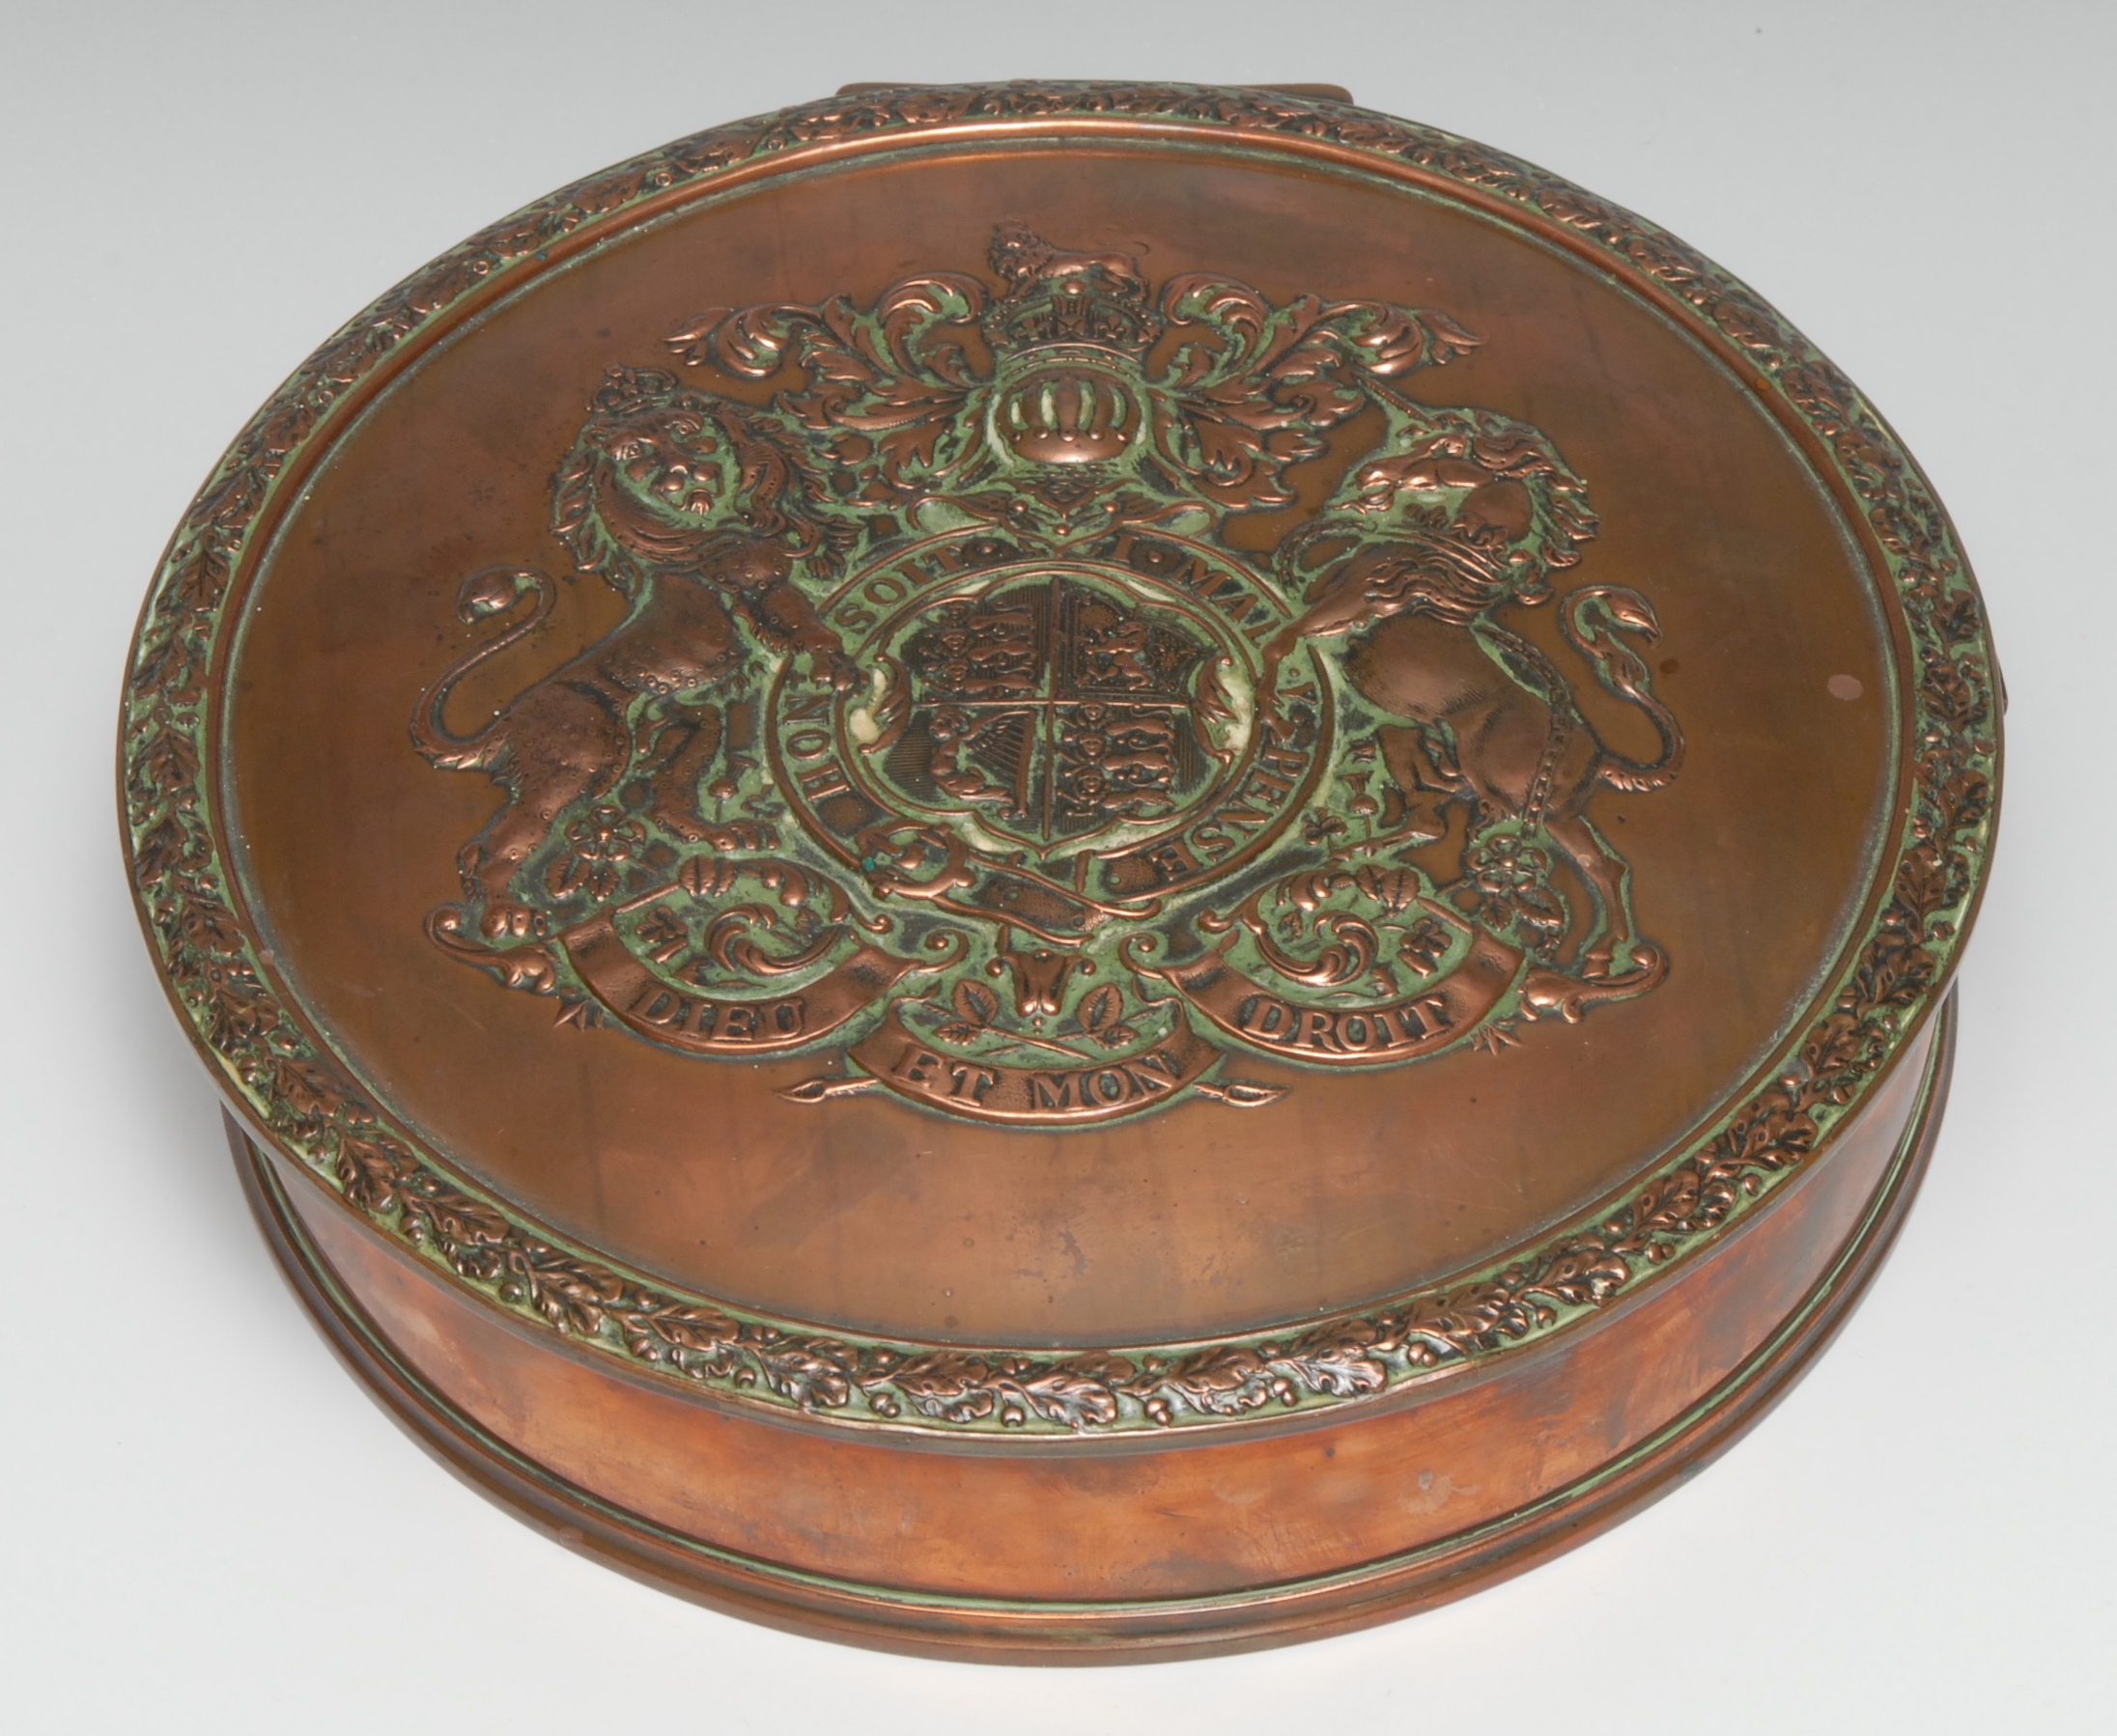 A William IV grant of letters patent or warrant, the copper case with royal coat of arms, 19cm diam,